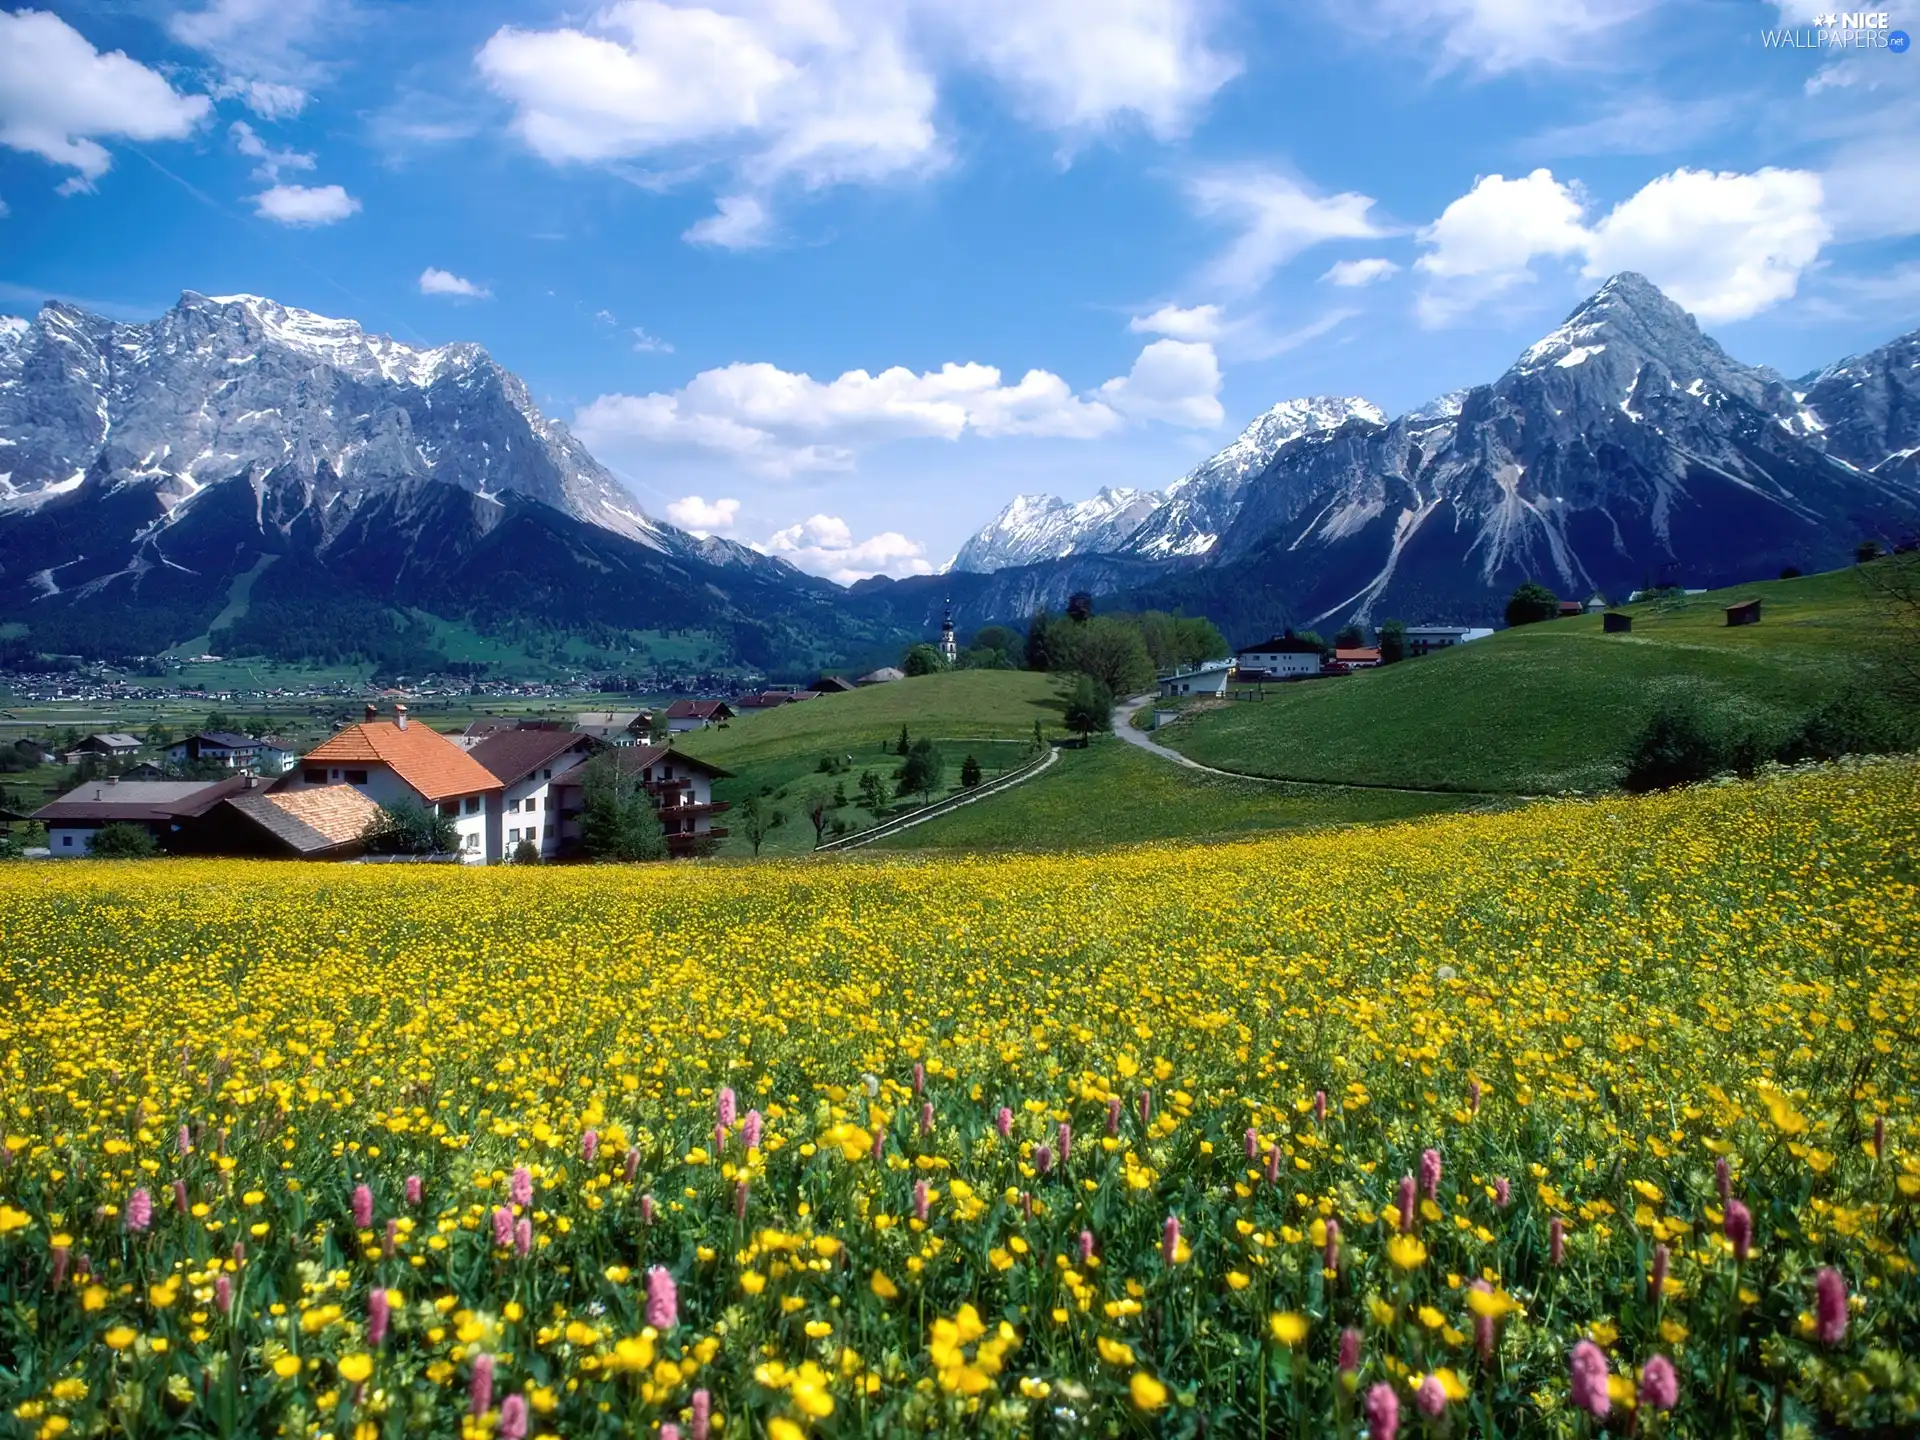 clouds, Mountains, Meadow, colony